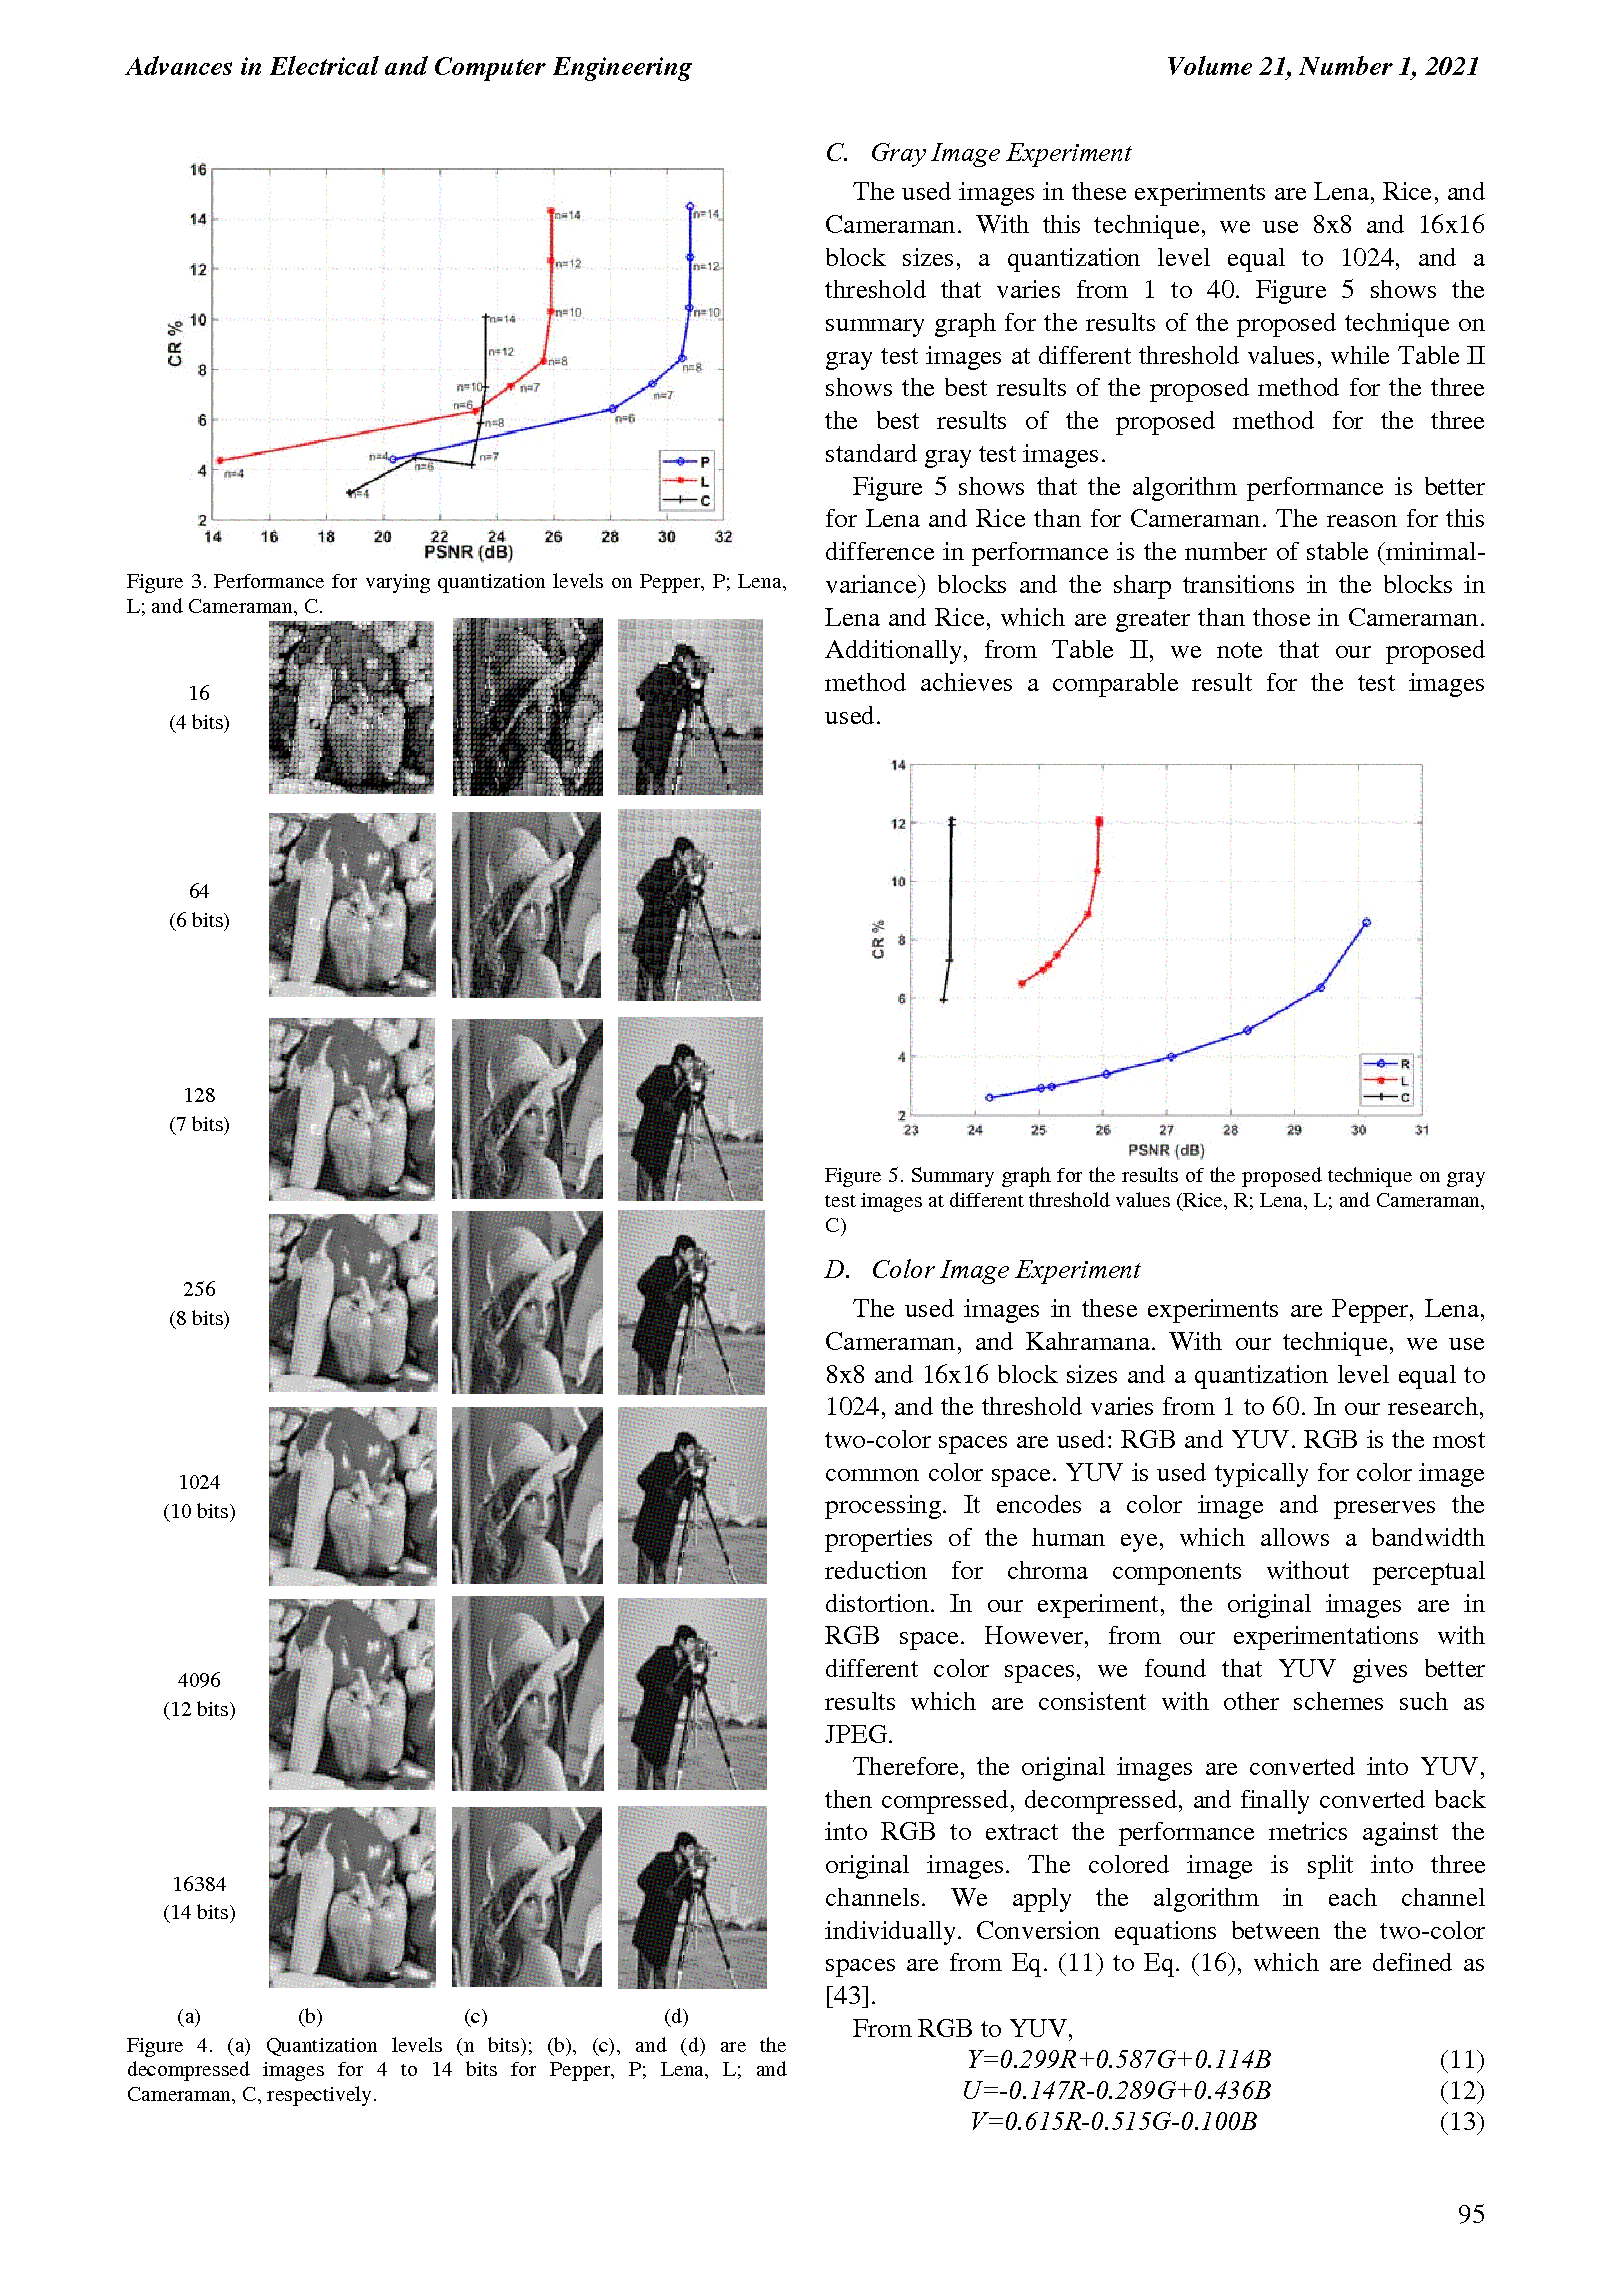 PDF Quickview for paper with DOI:10.4316/AECE.2021.01010